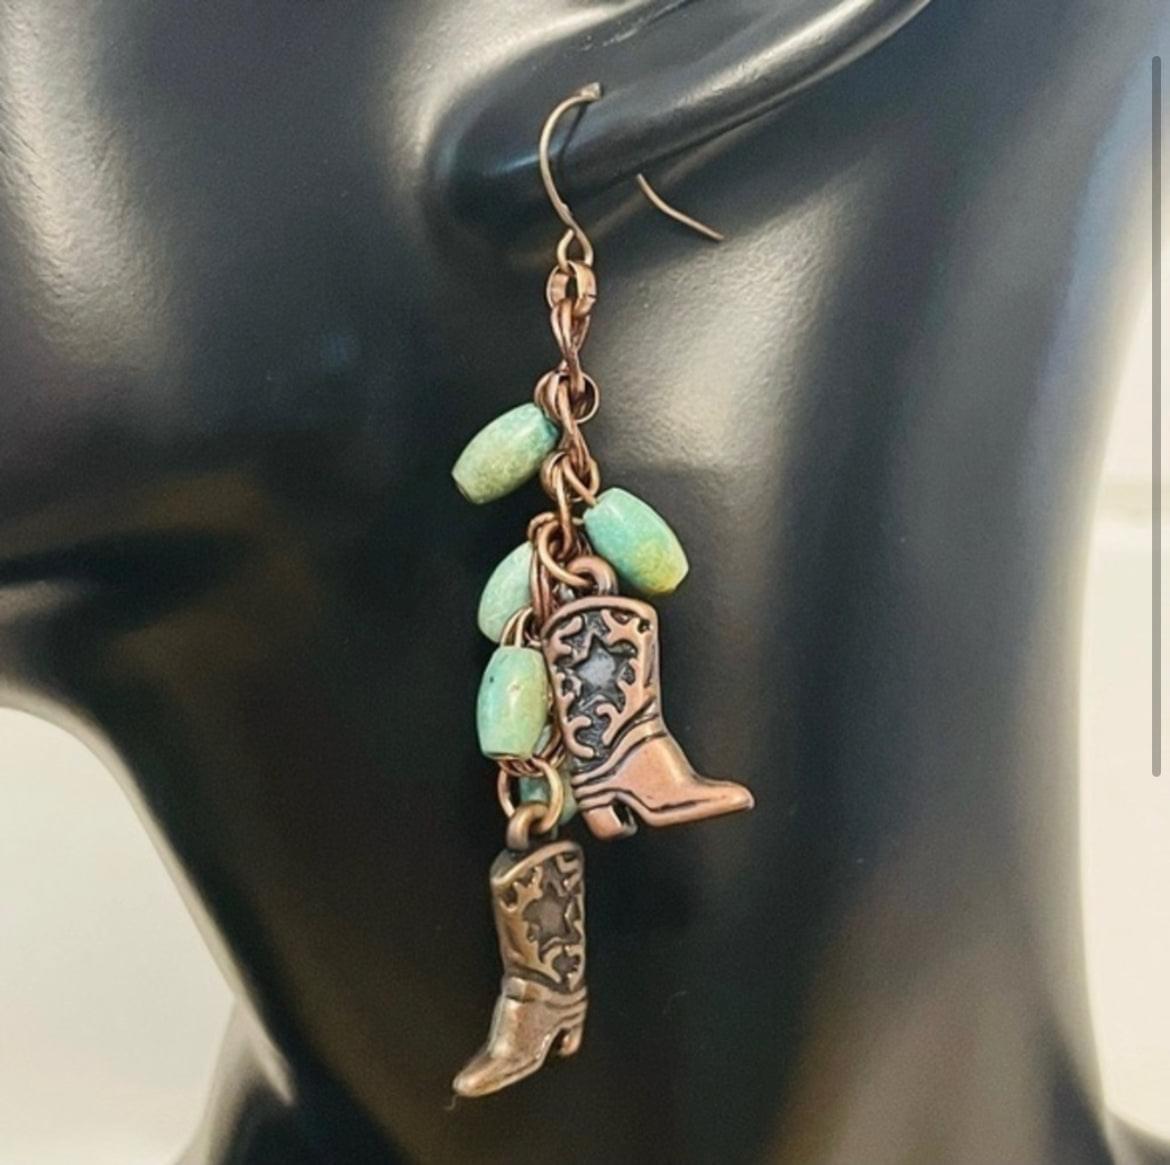 Copper Boot & Turquoise Statement Earrings Handmade 2.75” Cowgirl Cowboy Nashville Western